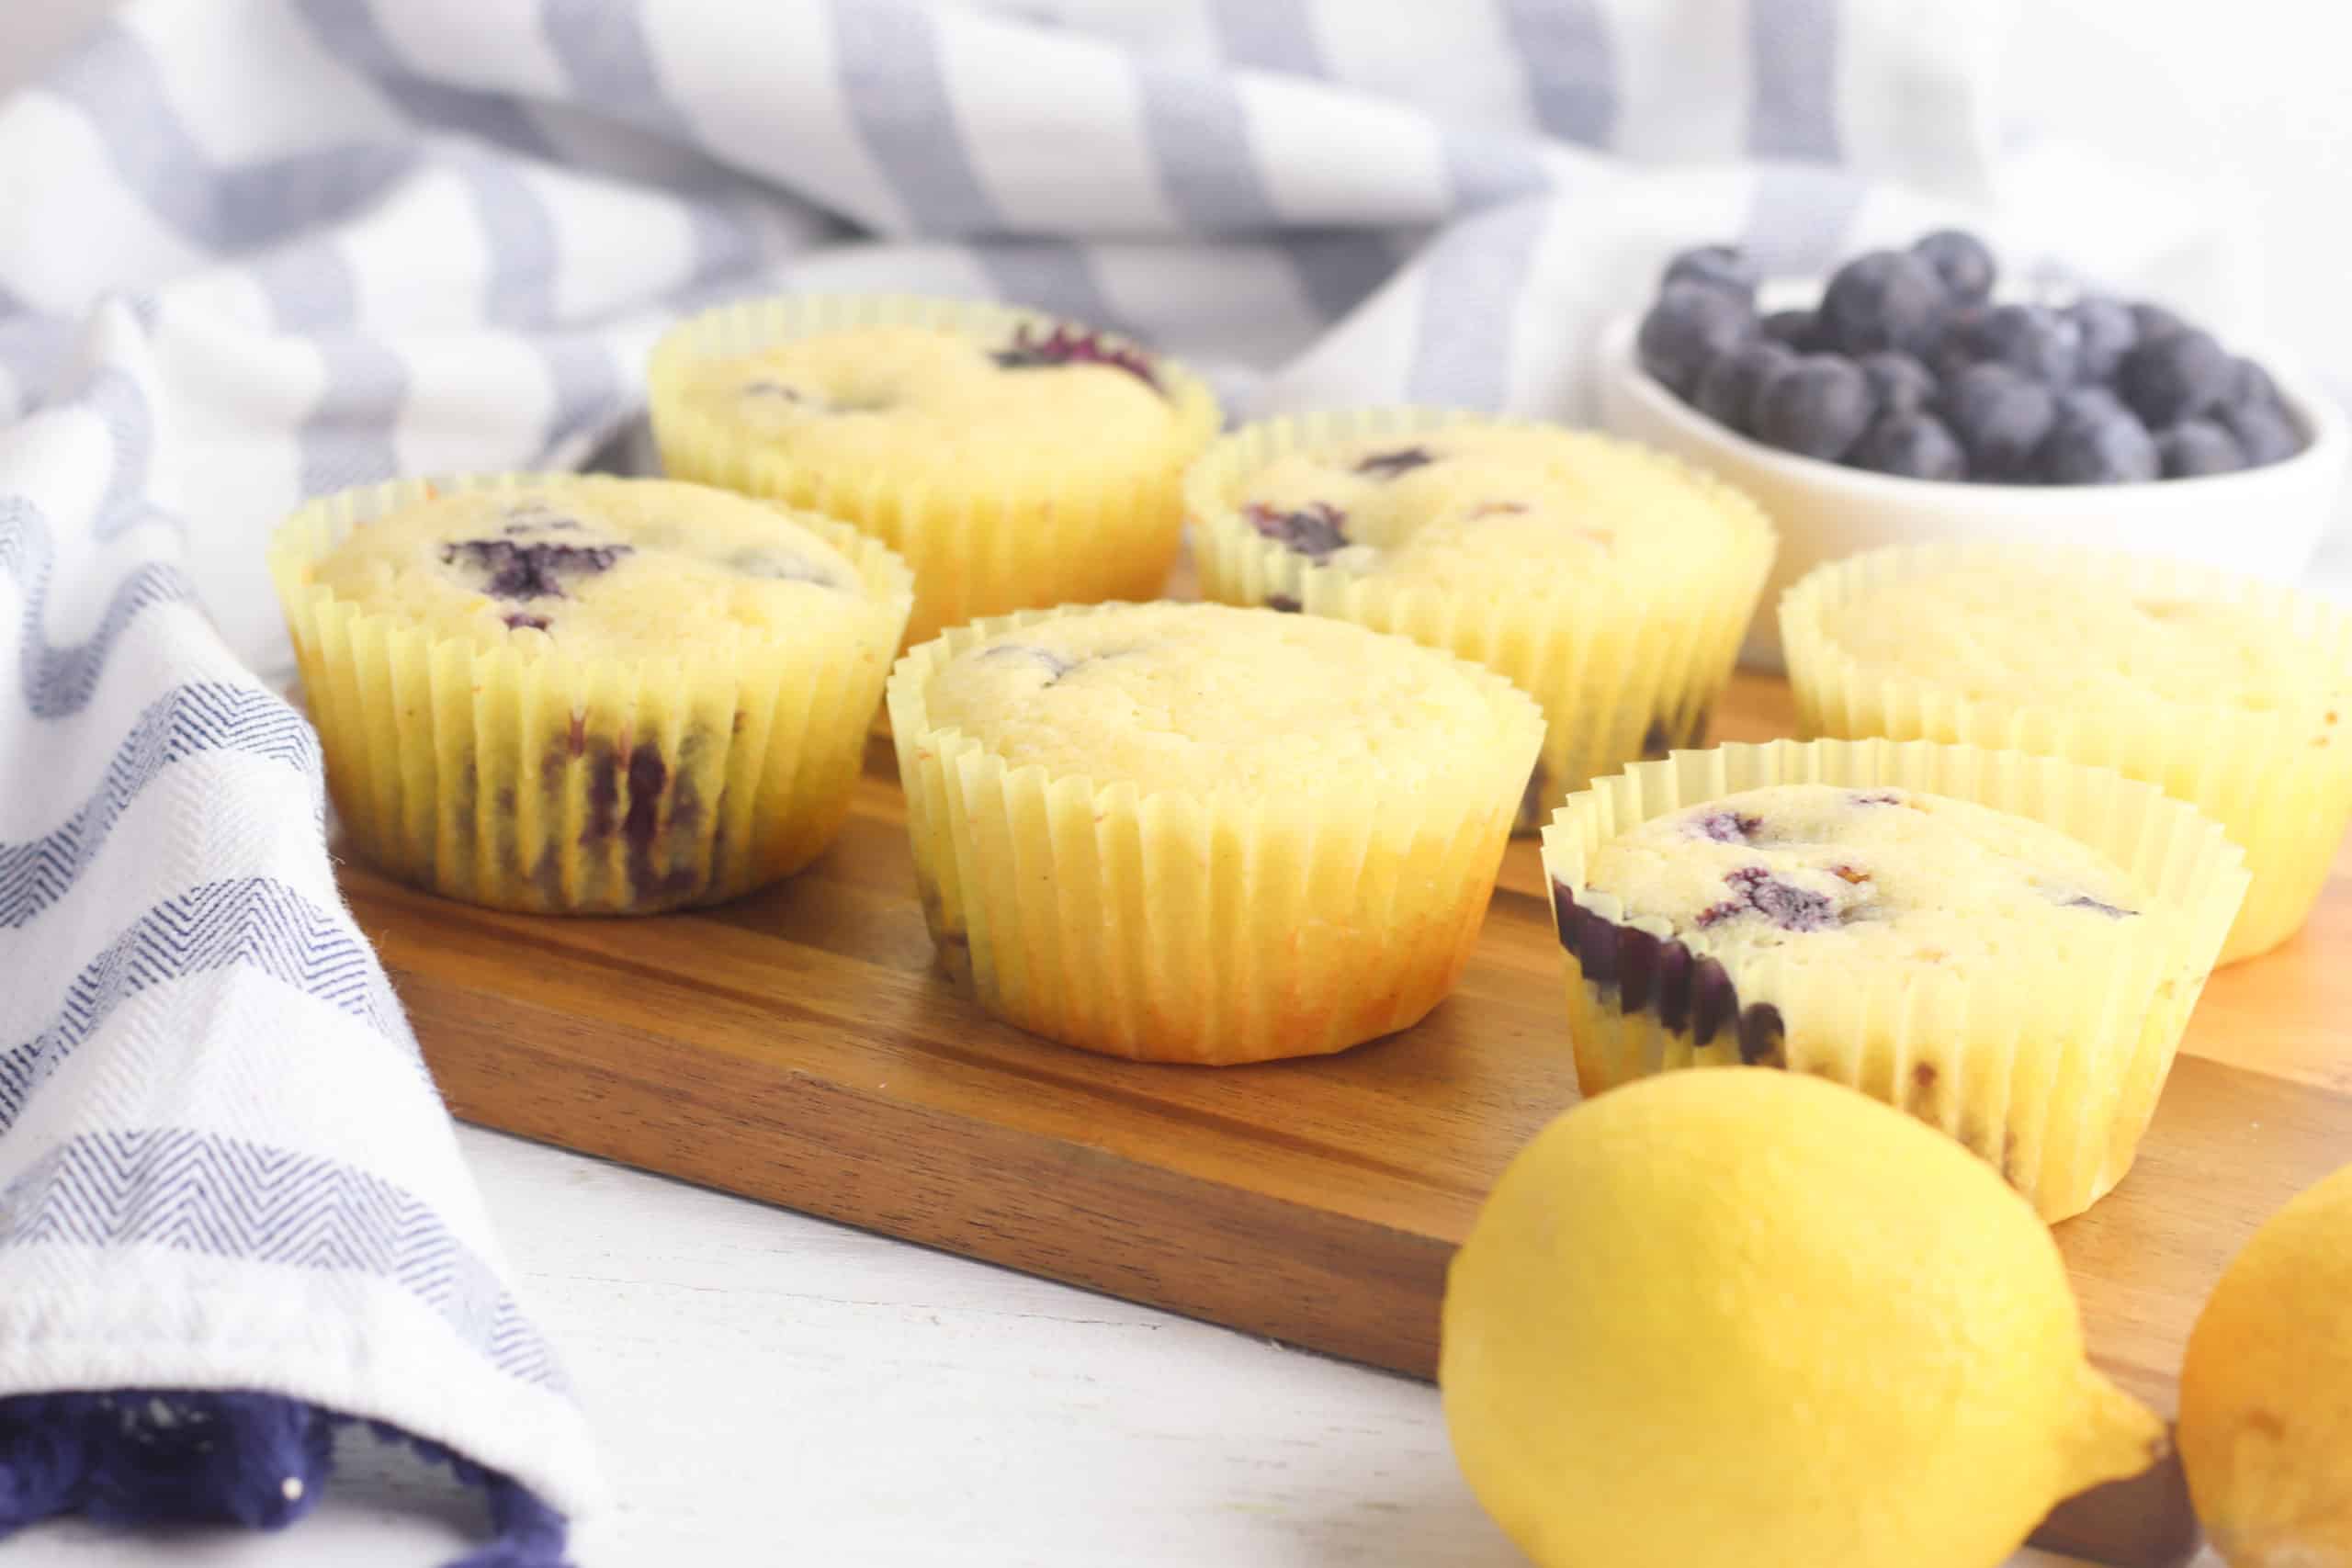 The best gluten free lemon blueberry muffins you will ever taste. Make them with this easy recipe.